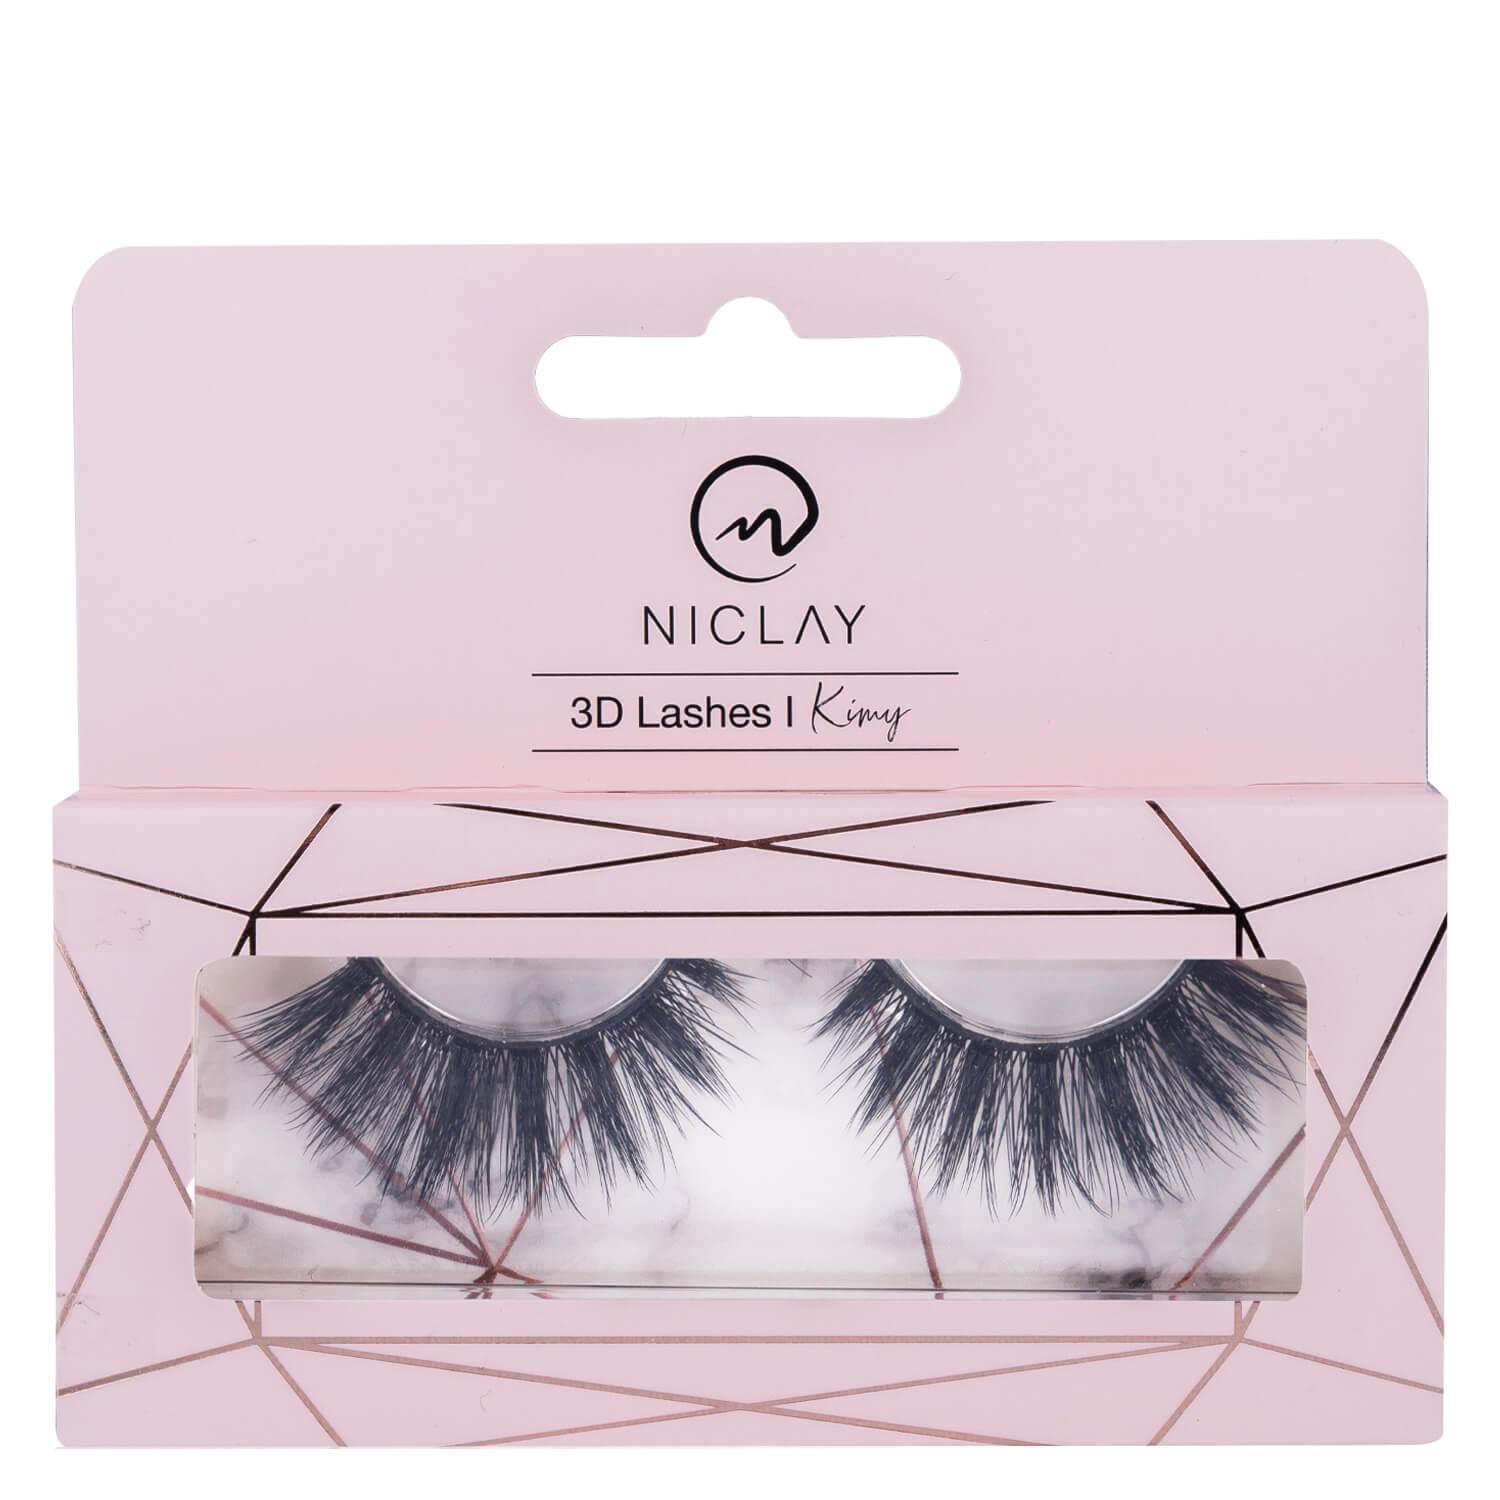 NICLAY - 3D Lashes Kimy